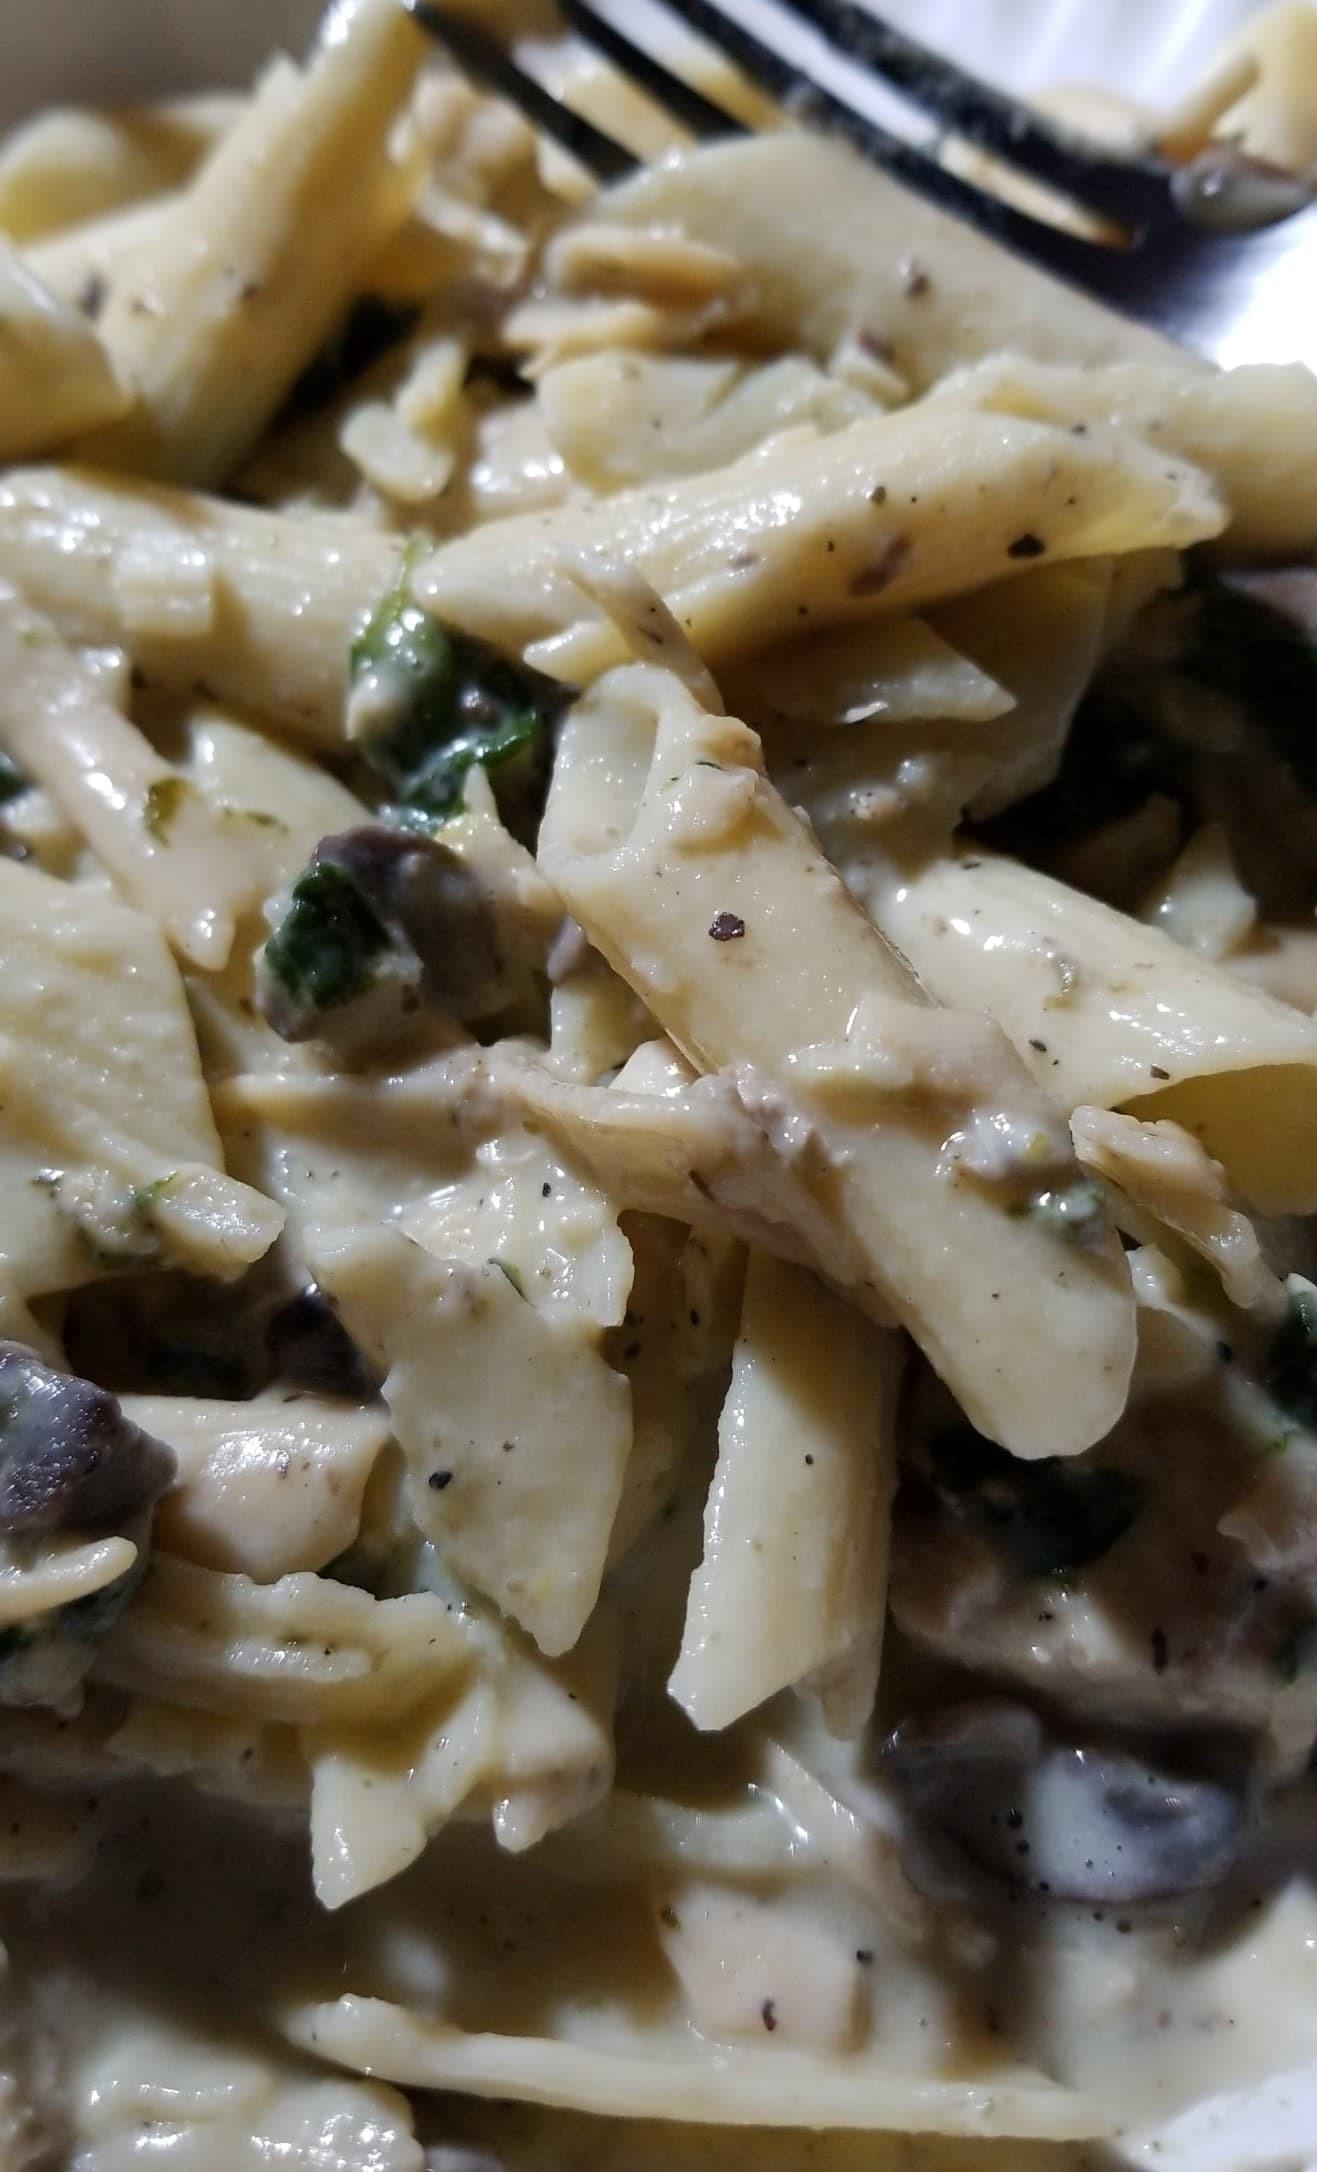 Image - Creamy Chicken and Spinach Pasta in Instant Pot
Olive oil, 2 uncooked boneless chicken breasts, lemon juice, ...